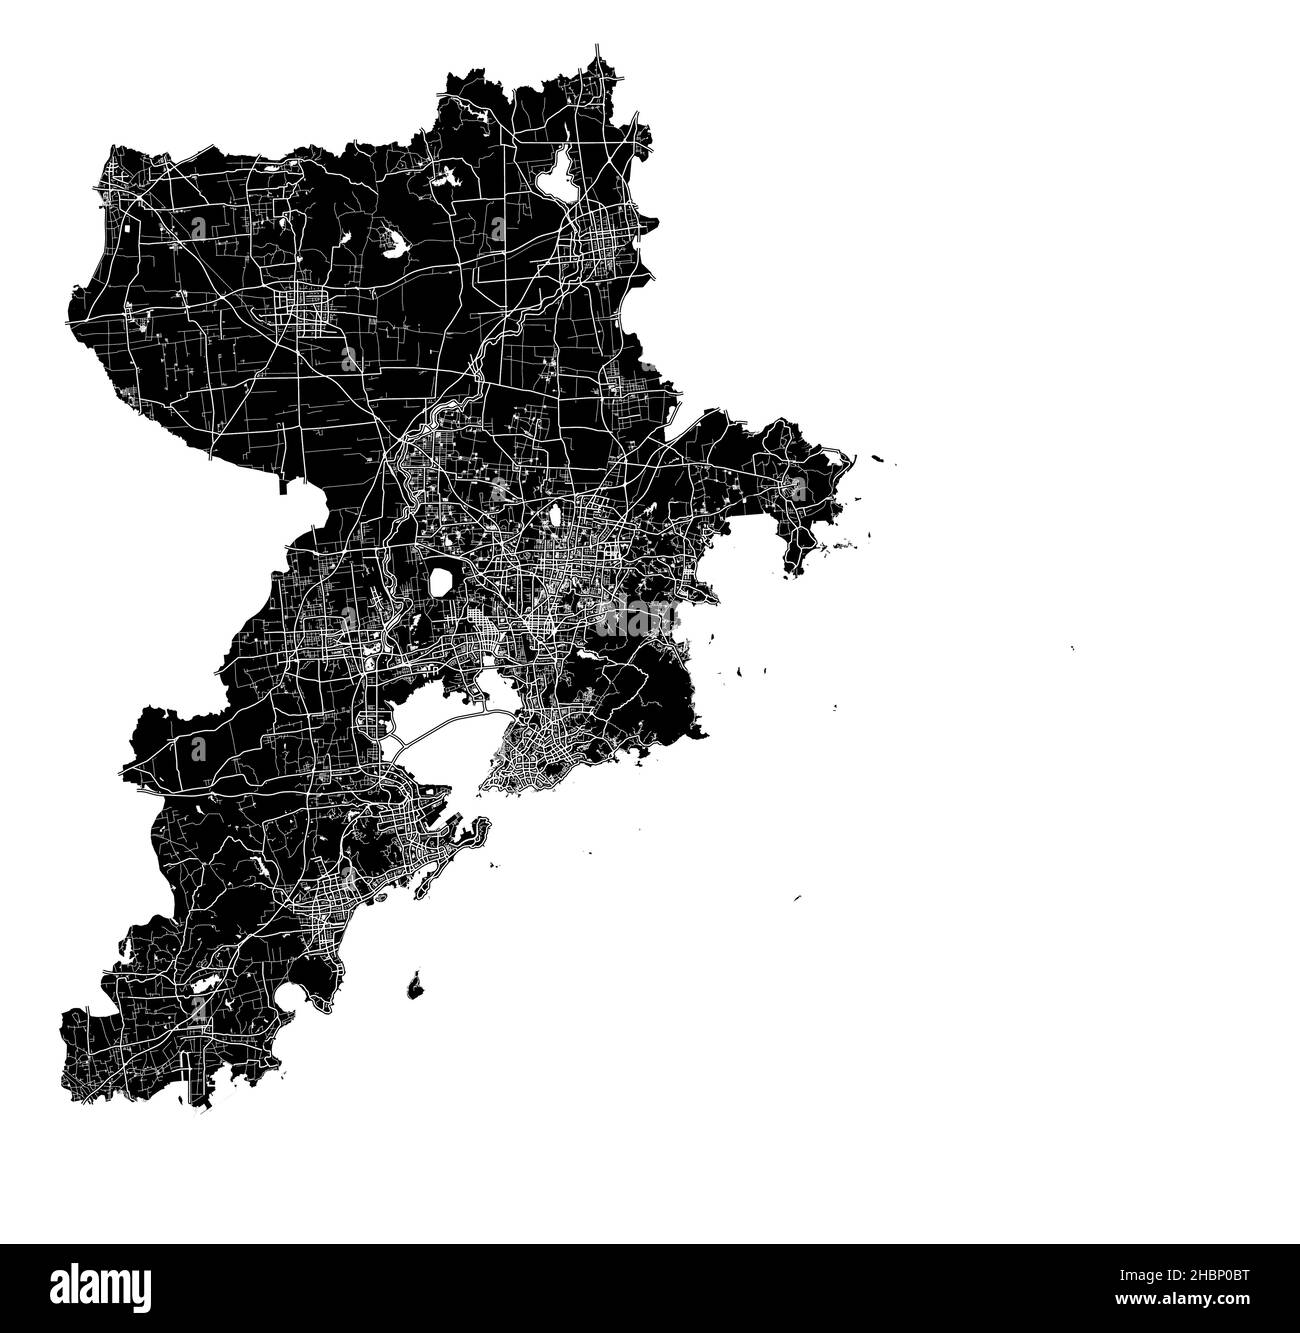 Qingdao, China, high resolution vector map with city boundaries, and editable paths. The city map was drawn with white areas and lines for main roads, Stock Vector